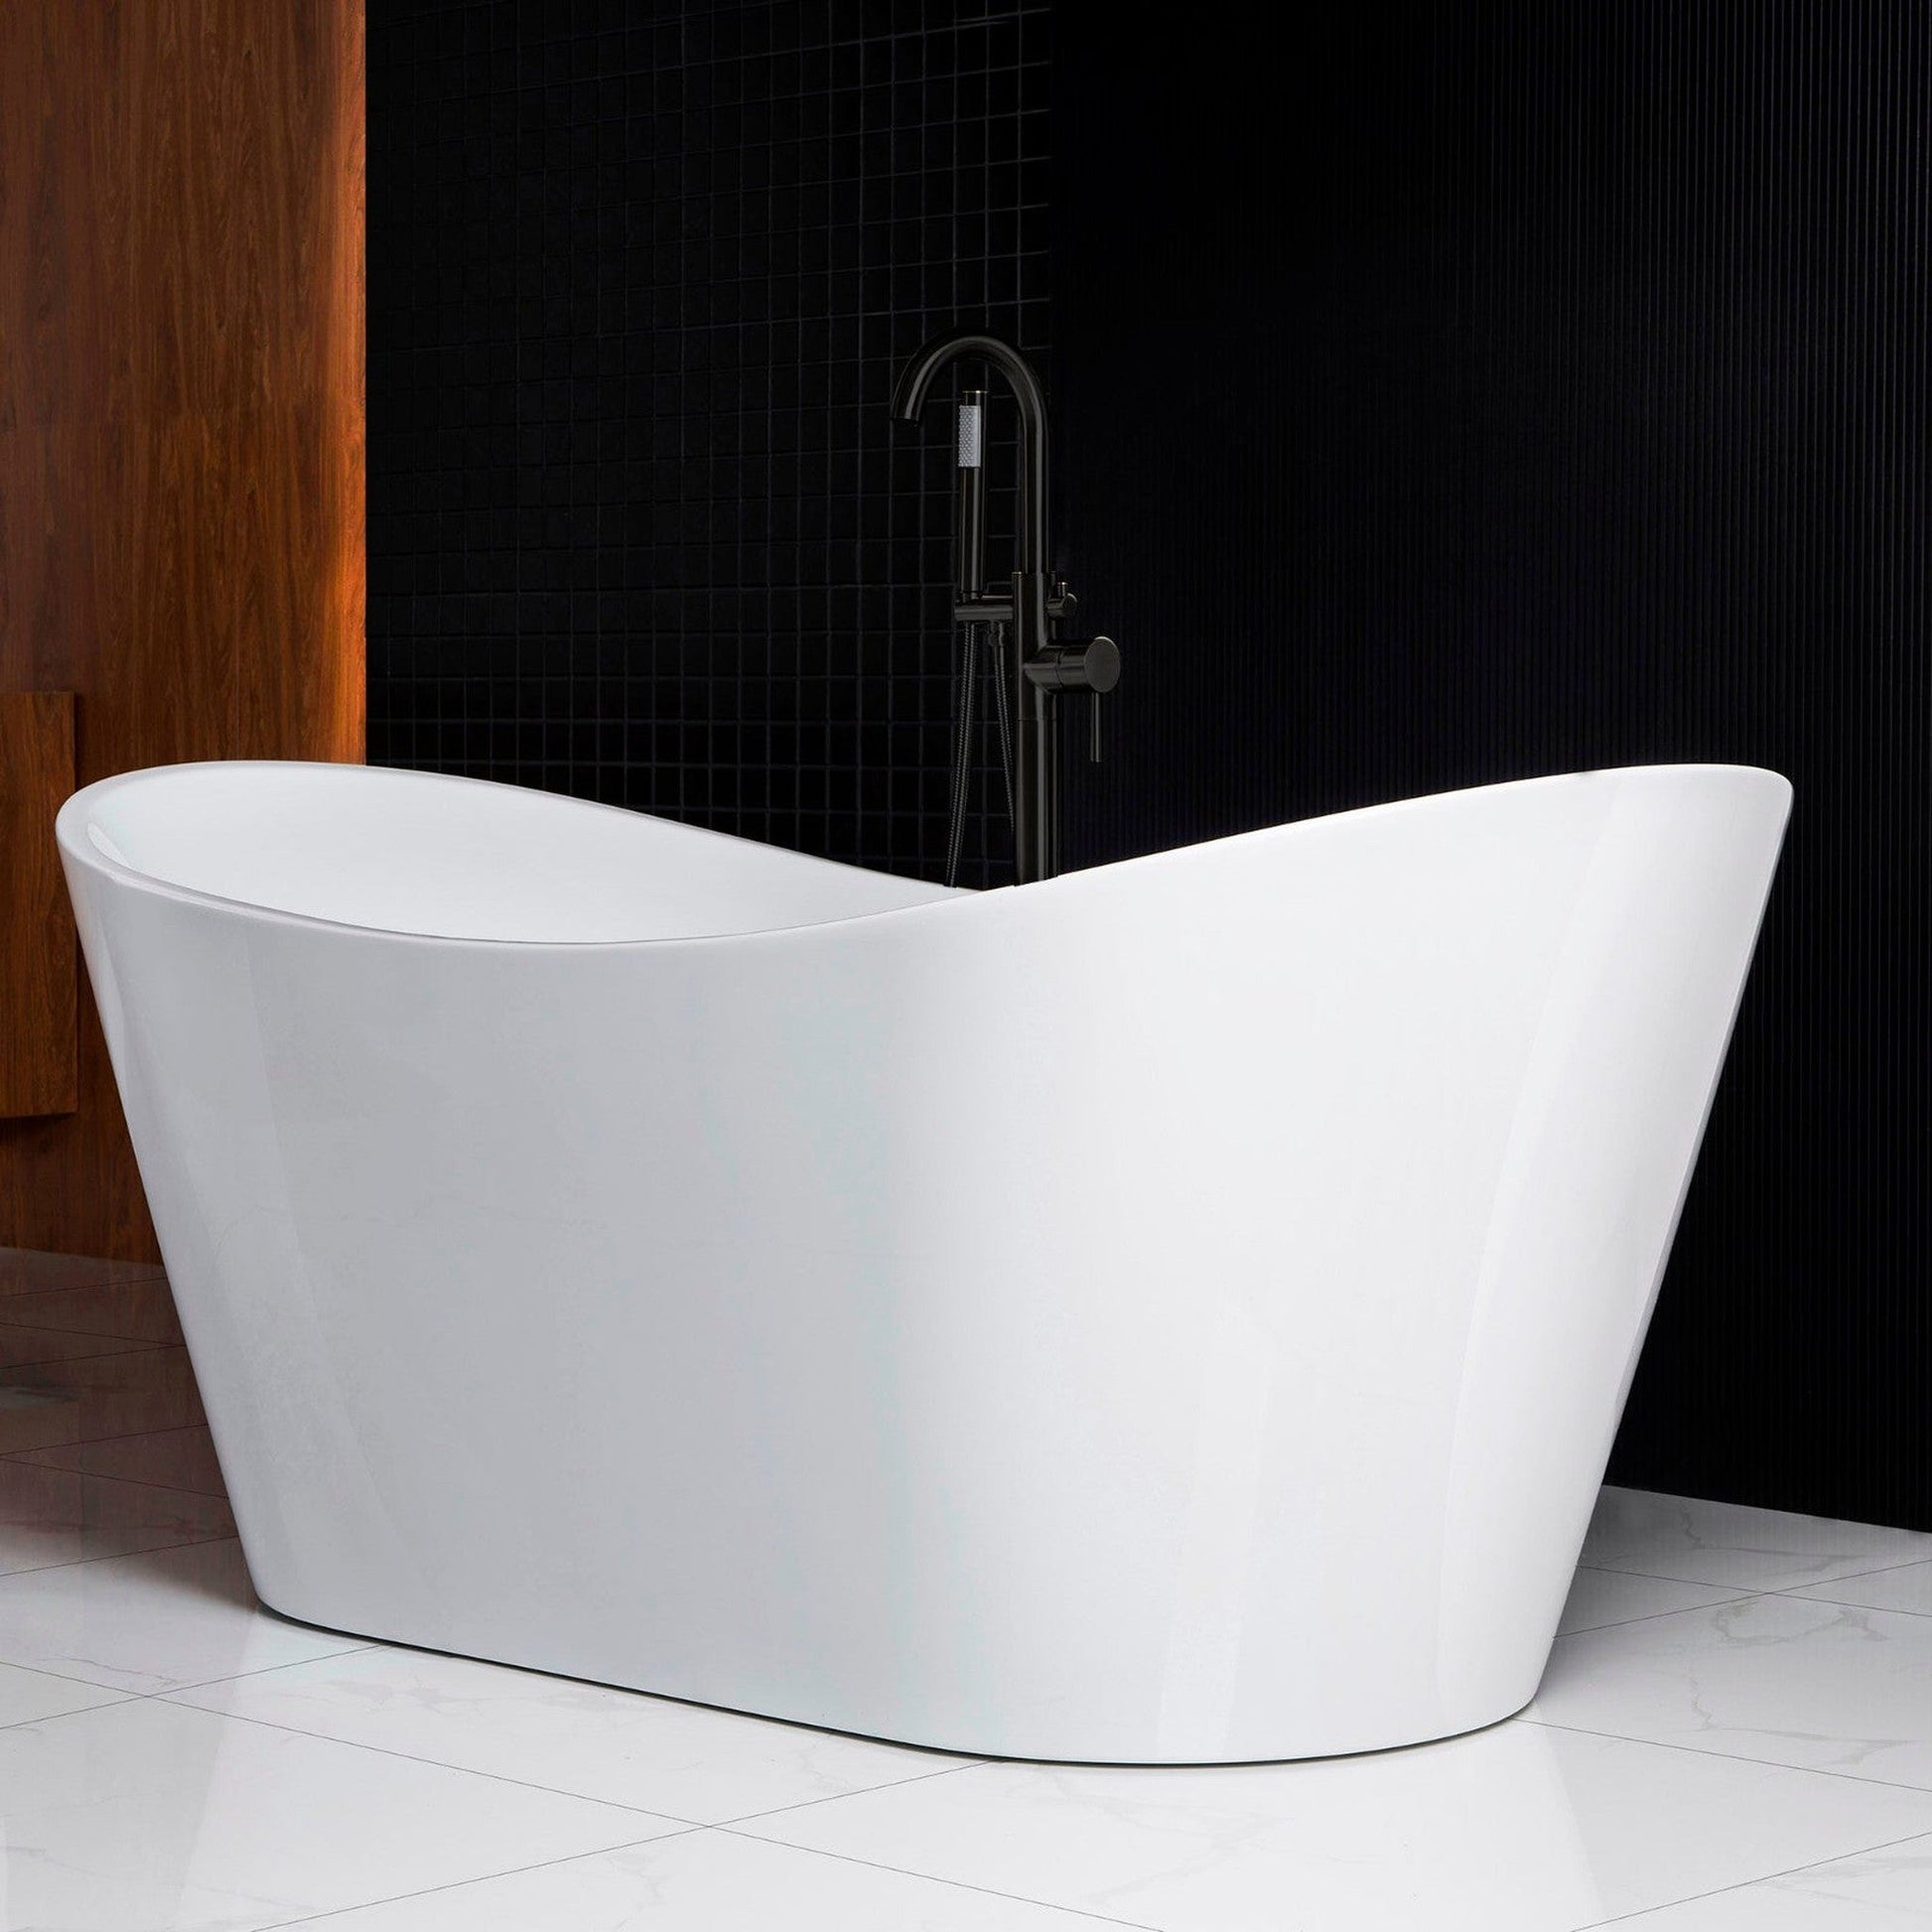 WoodBridge B0010 67" White Acrylic Freestanding Contemporary Soaking Bathtub With Matte Black Drain, Overflow, F0072MBSQ Tub Filler and Caddy Tray